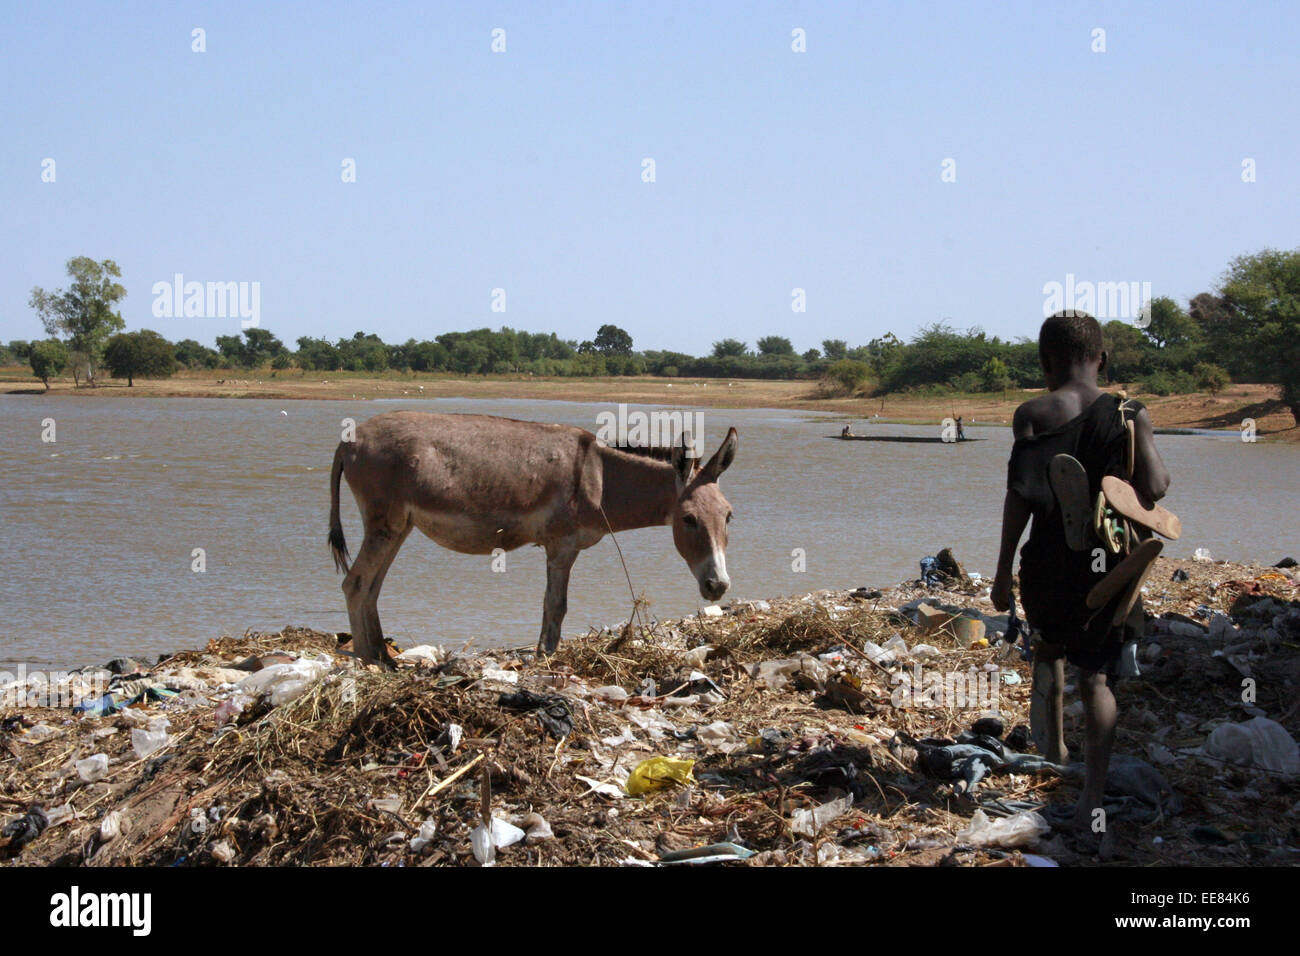 A donkey stares at a boy walking across a rubbish tip in Djenne, Mali Stock Photo